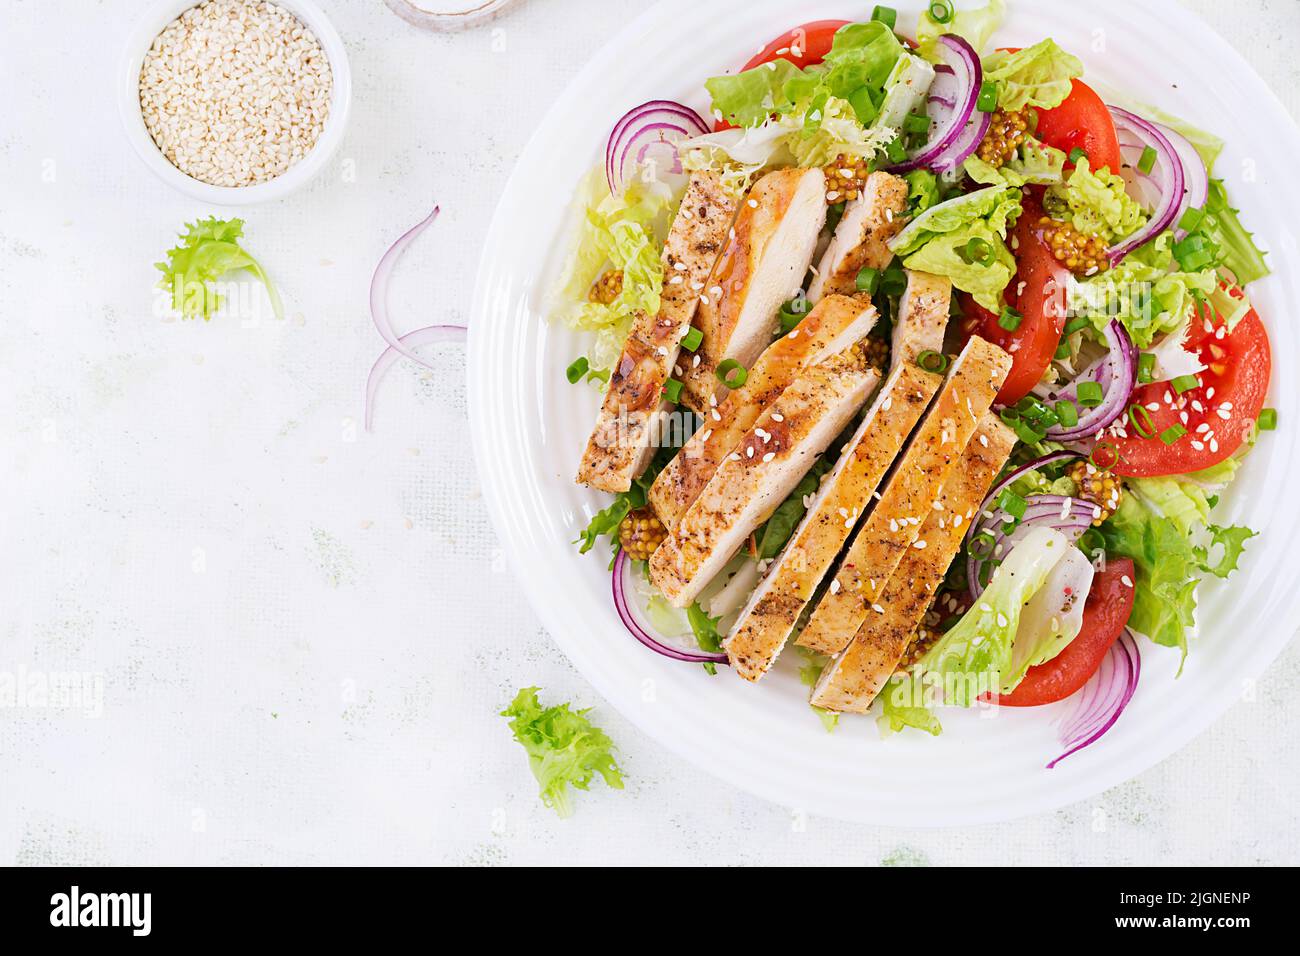 Salad with grilled chicken breast. Fresh vegetable salad with chicken meat. Healthy lunch menu. Diet food. Top view, flat lay Stock Photo